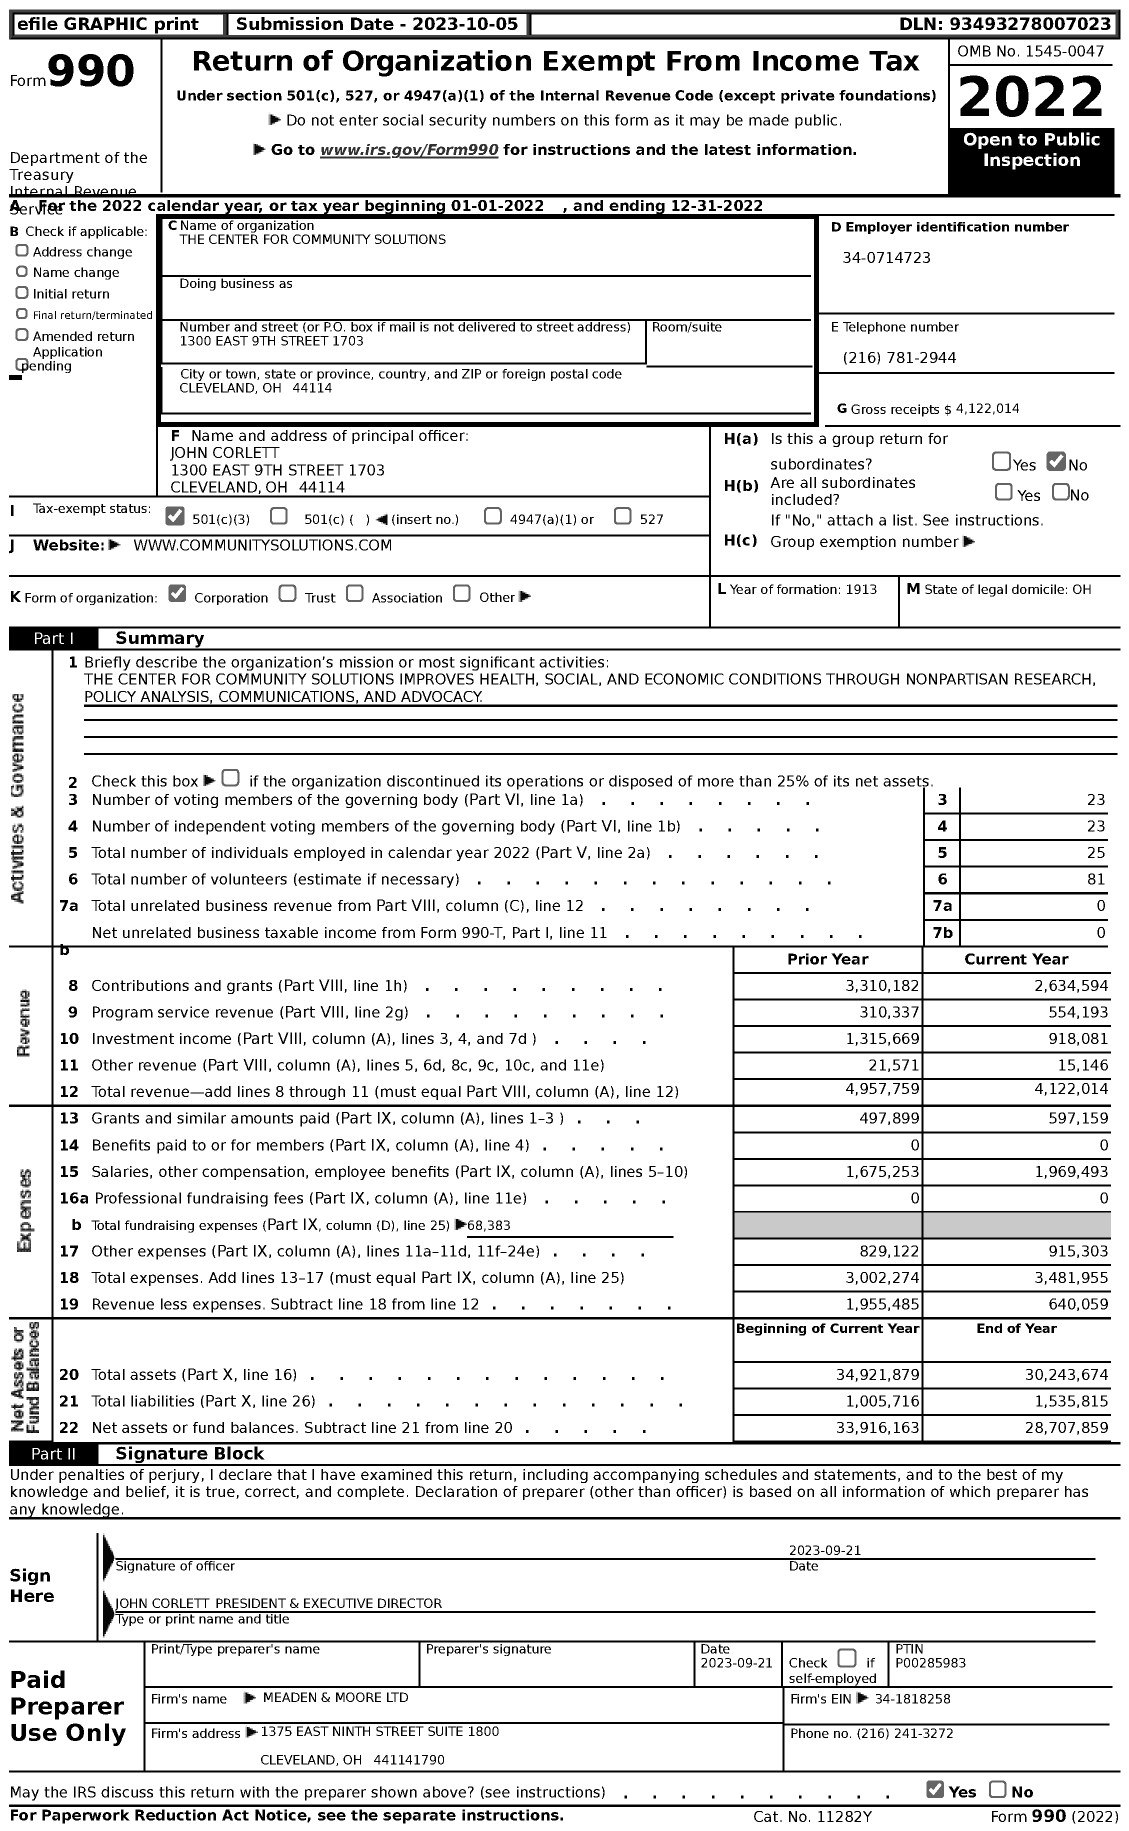 Image of first page of 2022 Form 990 for The Center for Community Solutions